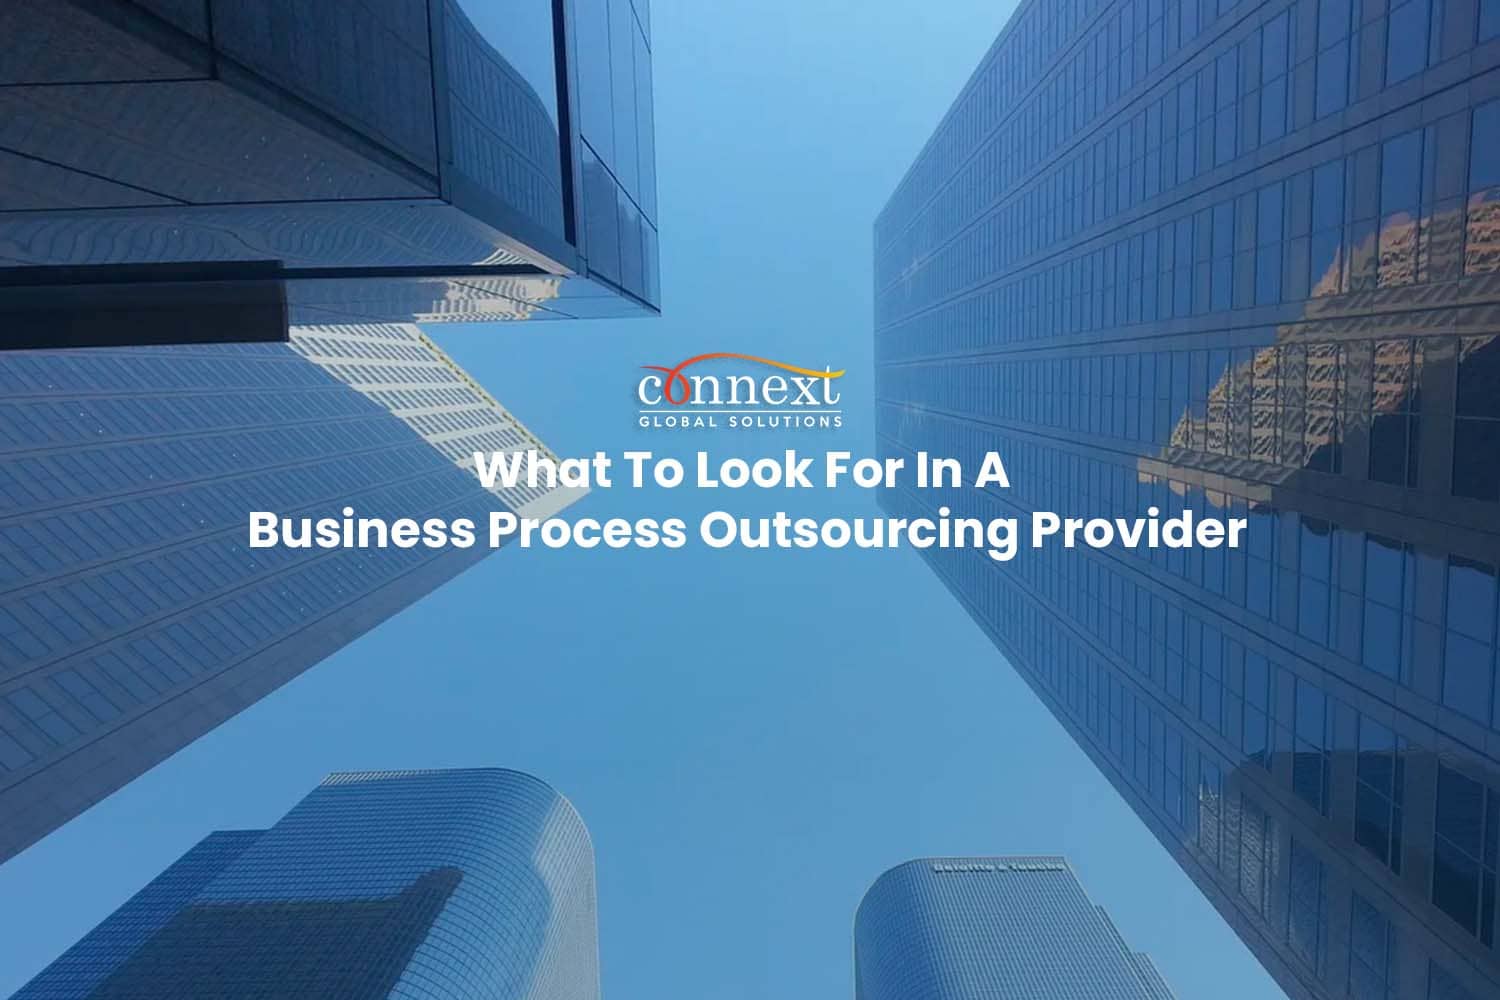 What To Look For In A Business Process Outsourcing Provider